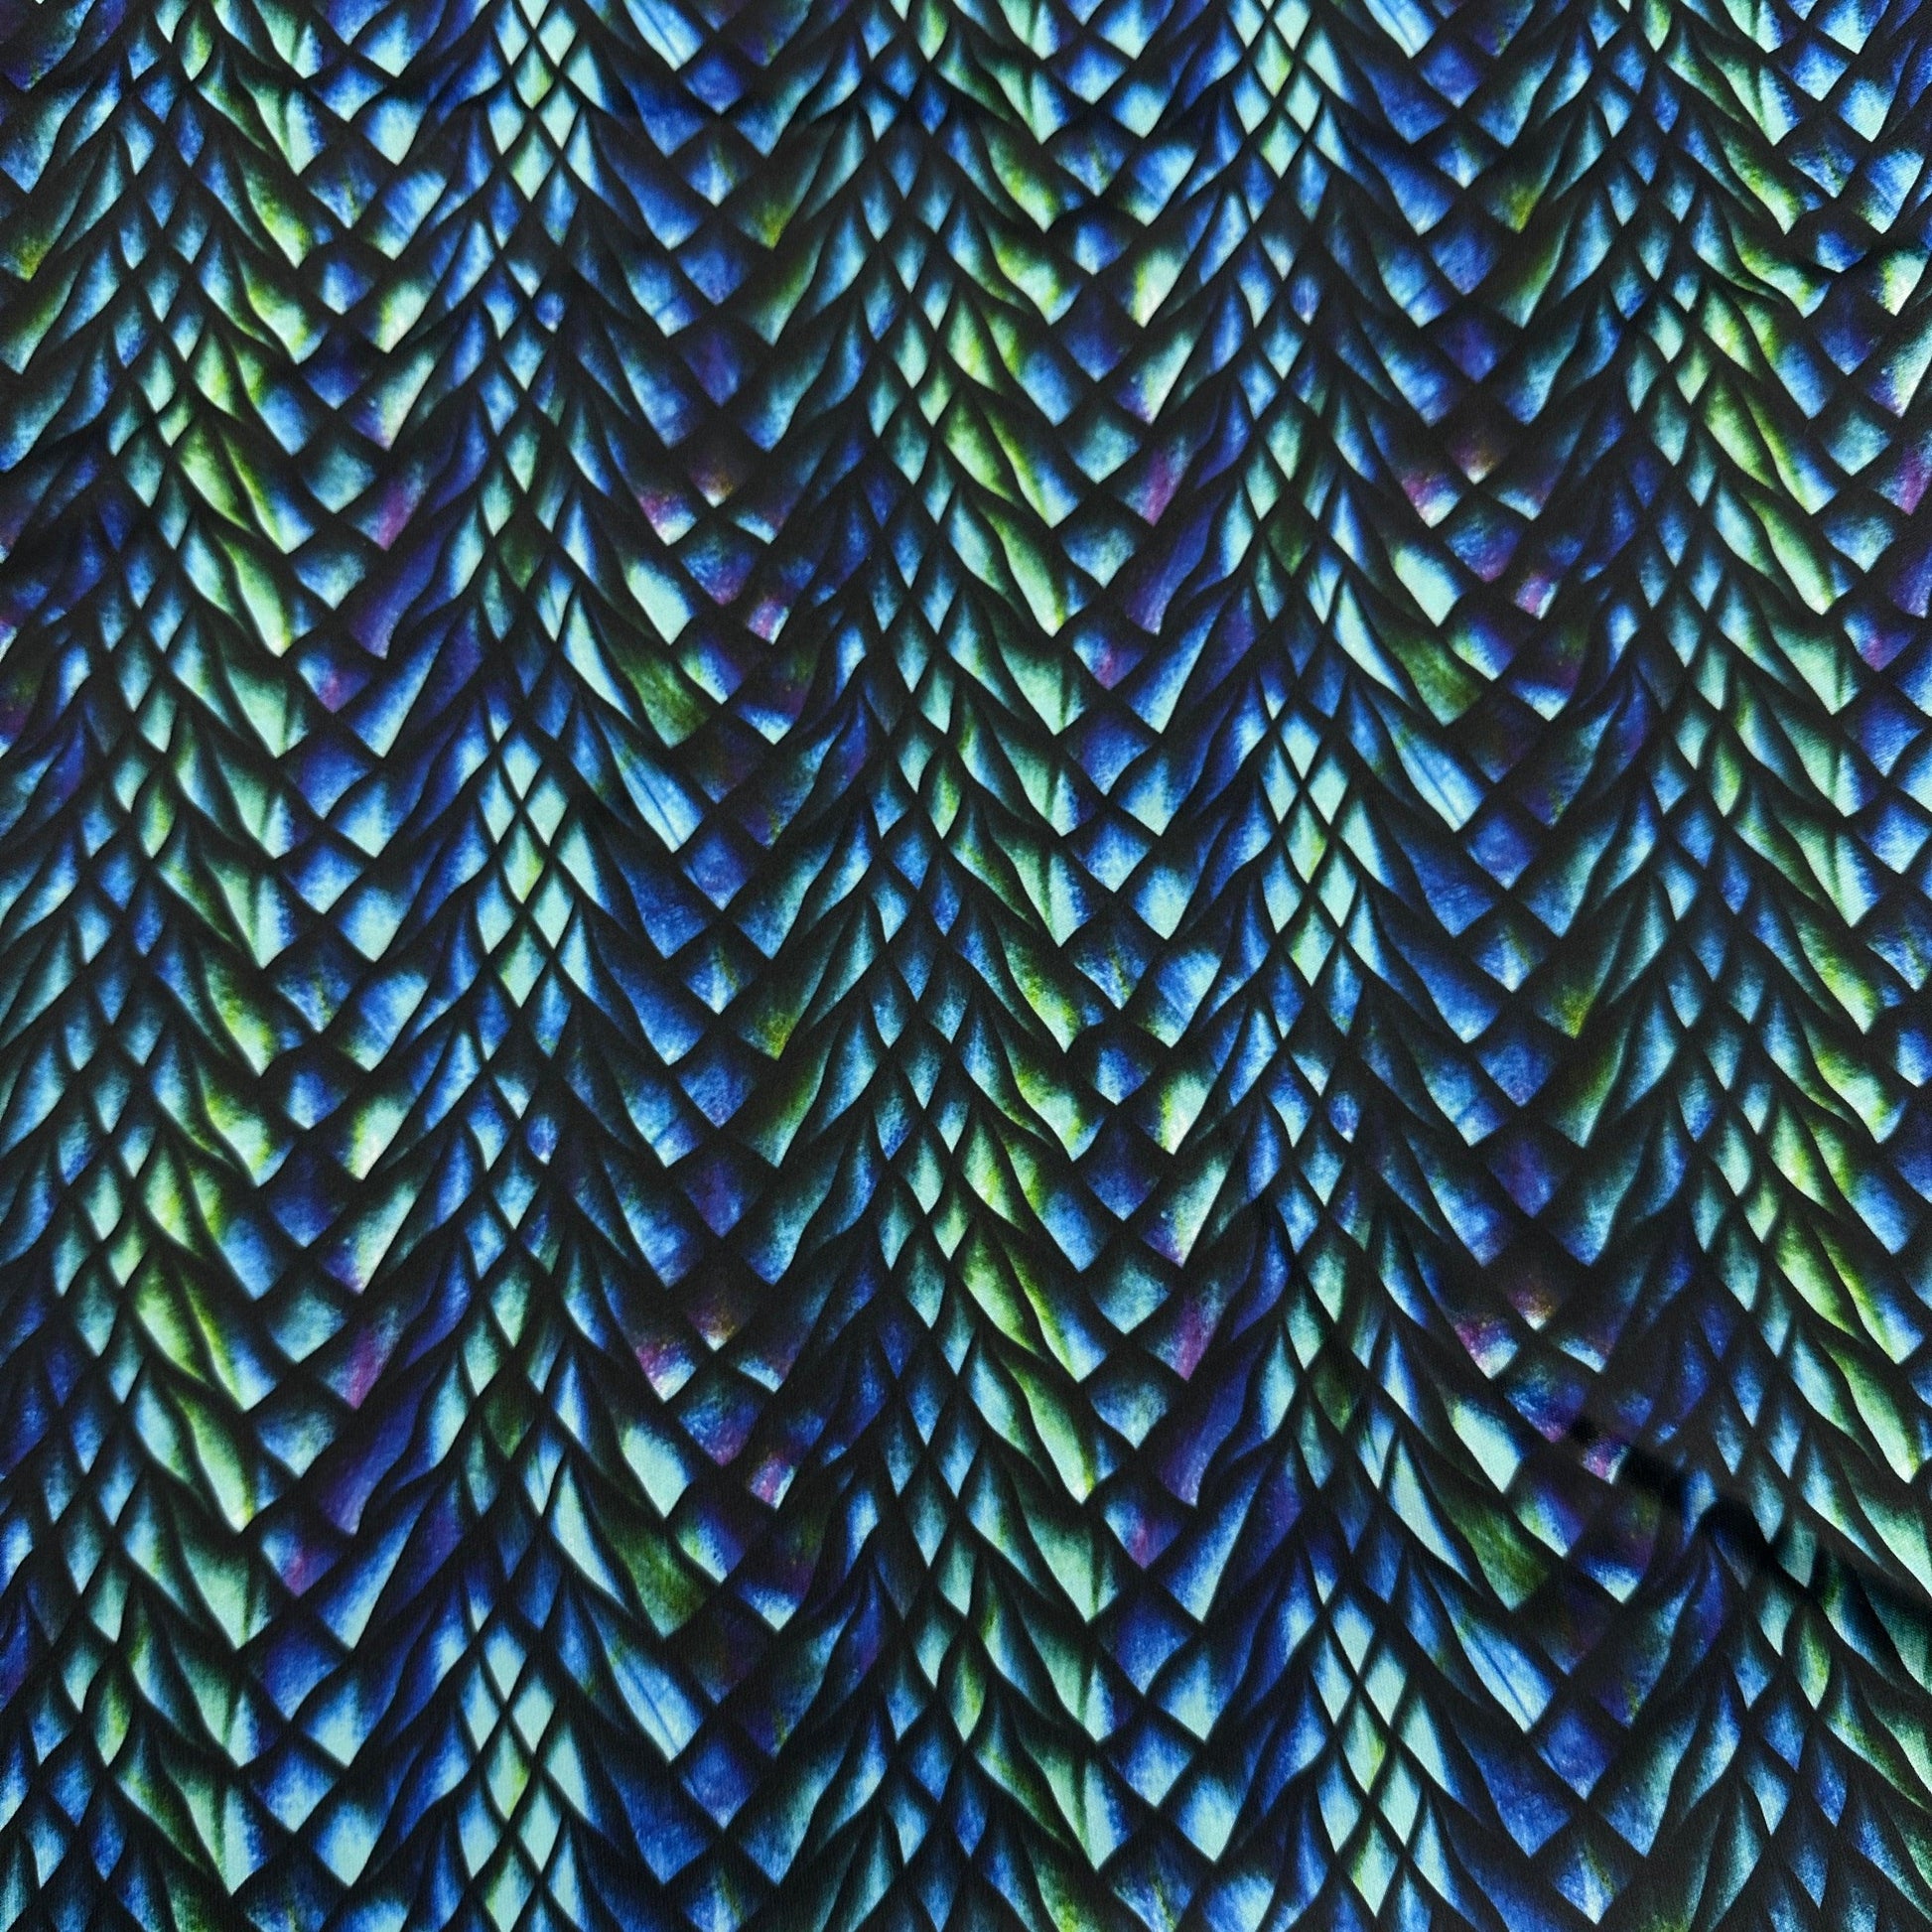 Purple and Blue Dragon Scales 1 mil PUL Fabric - Made in the USA - Nature's Fabrics